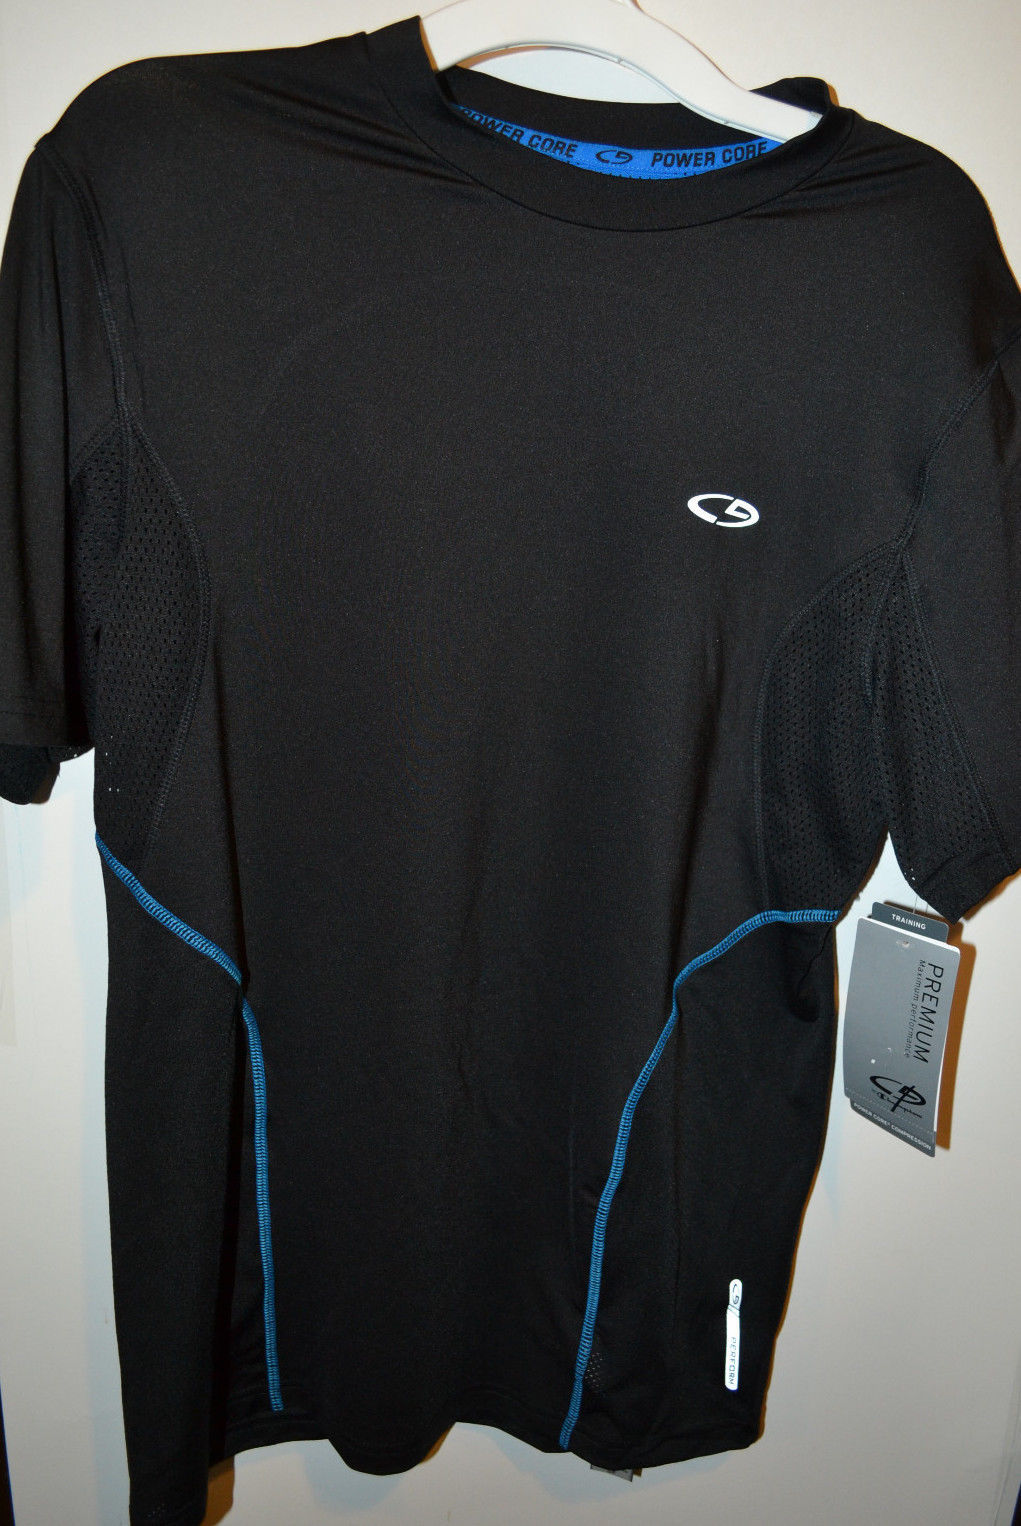 Primary image for Mens Champion Premium Training Top Size S NWT Black Blue